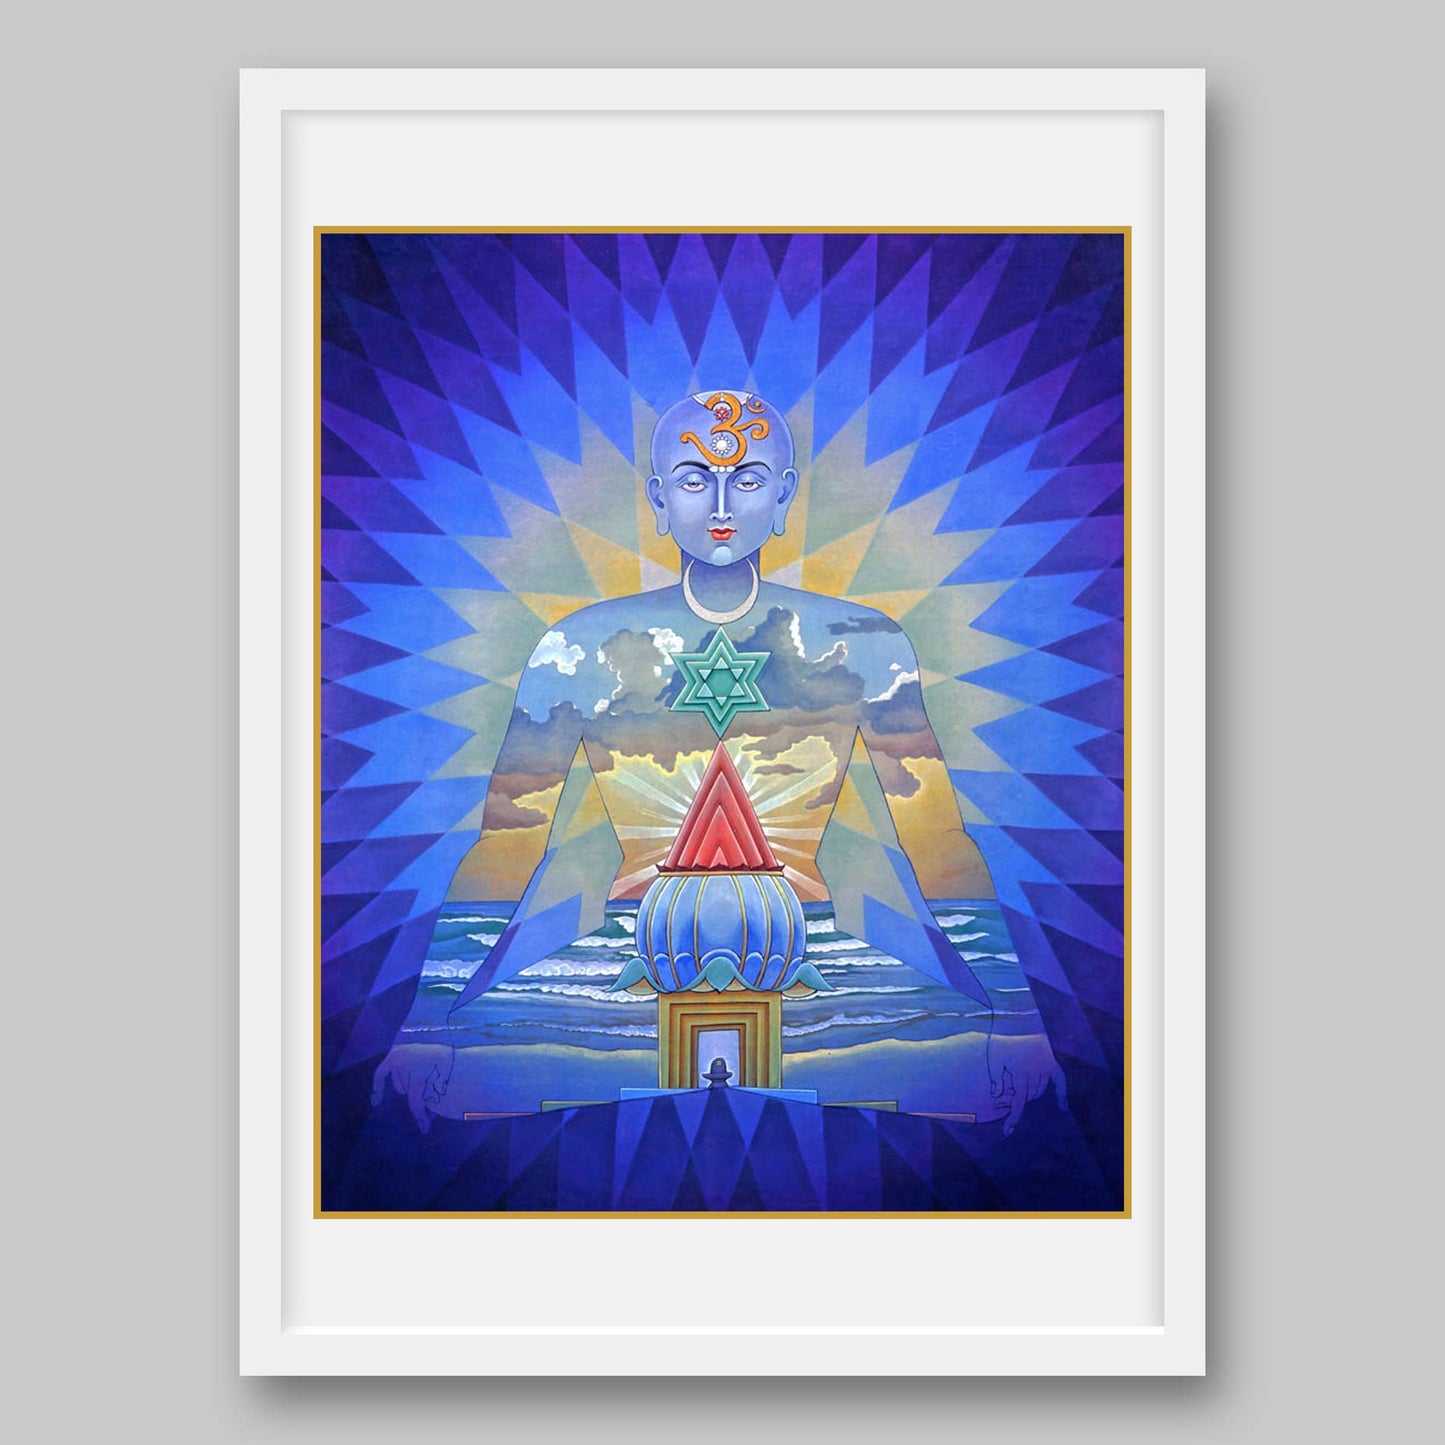 Seven Chakras – High Quality Print of Artwork by Pieter Weltevrede